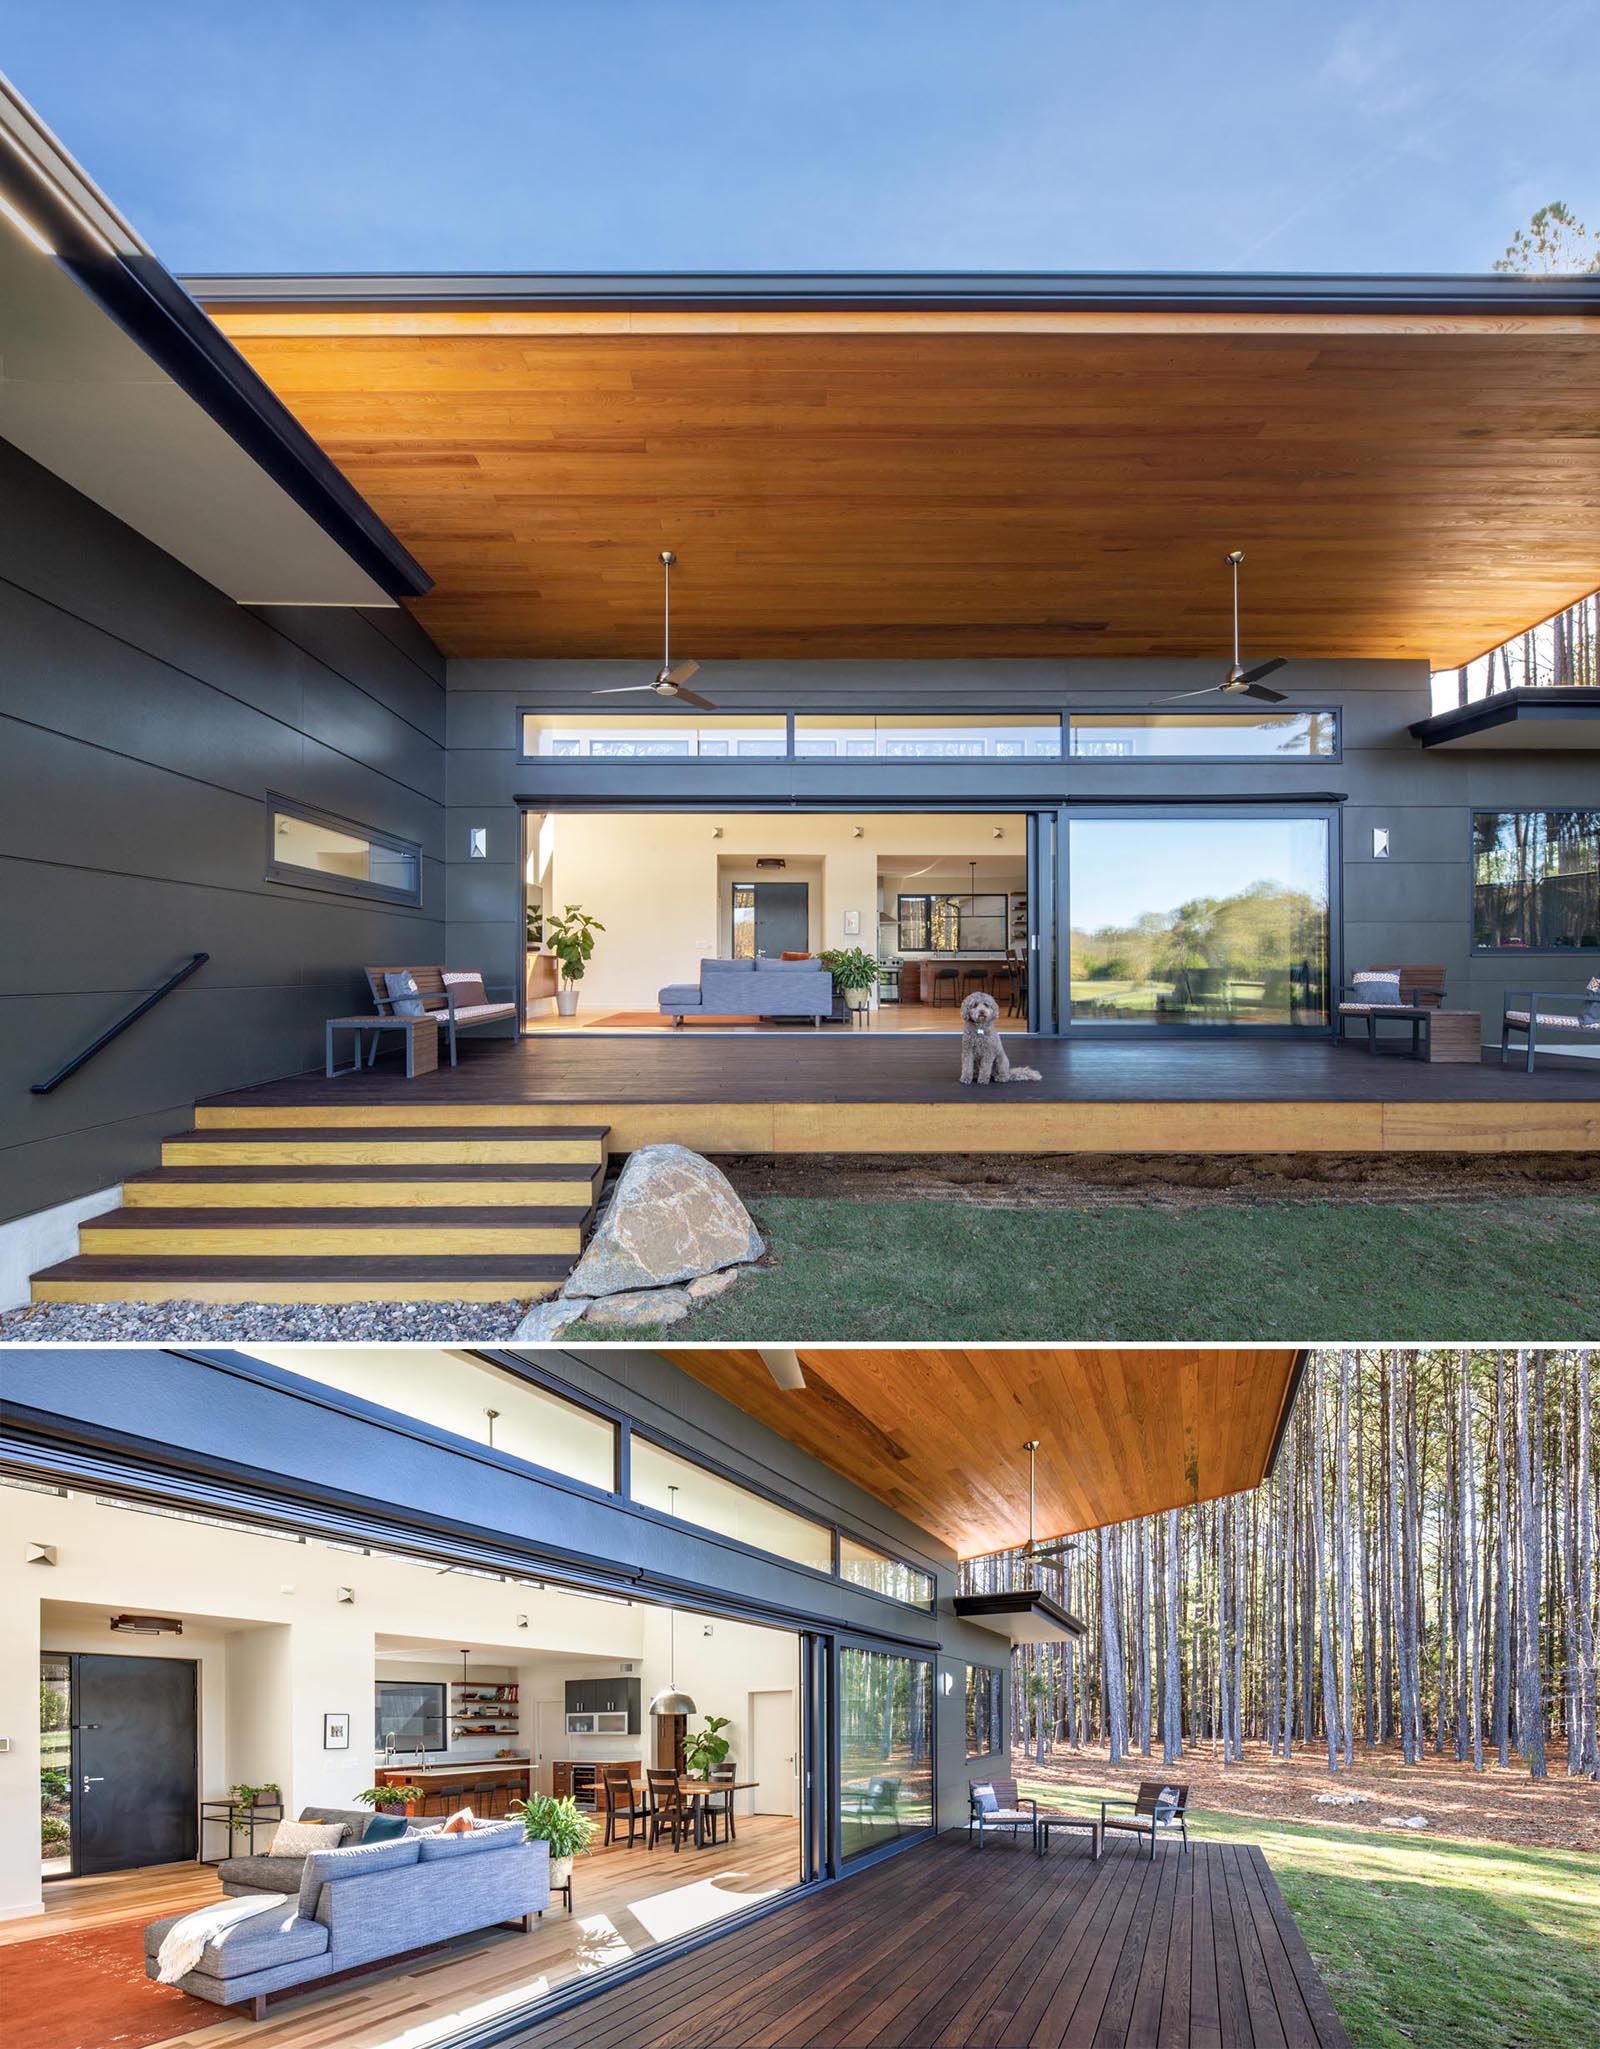 Operable glass doors (built to passive house standards for energy efficiency) were included in this modern home design to connect the interior spaces to the outdoors.